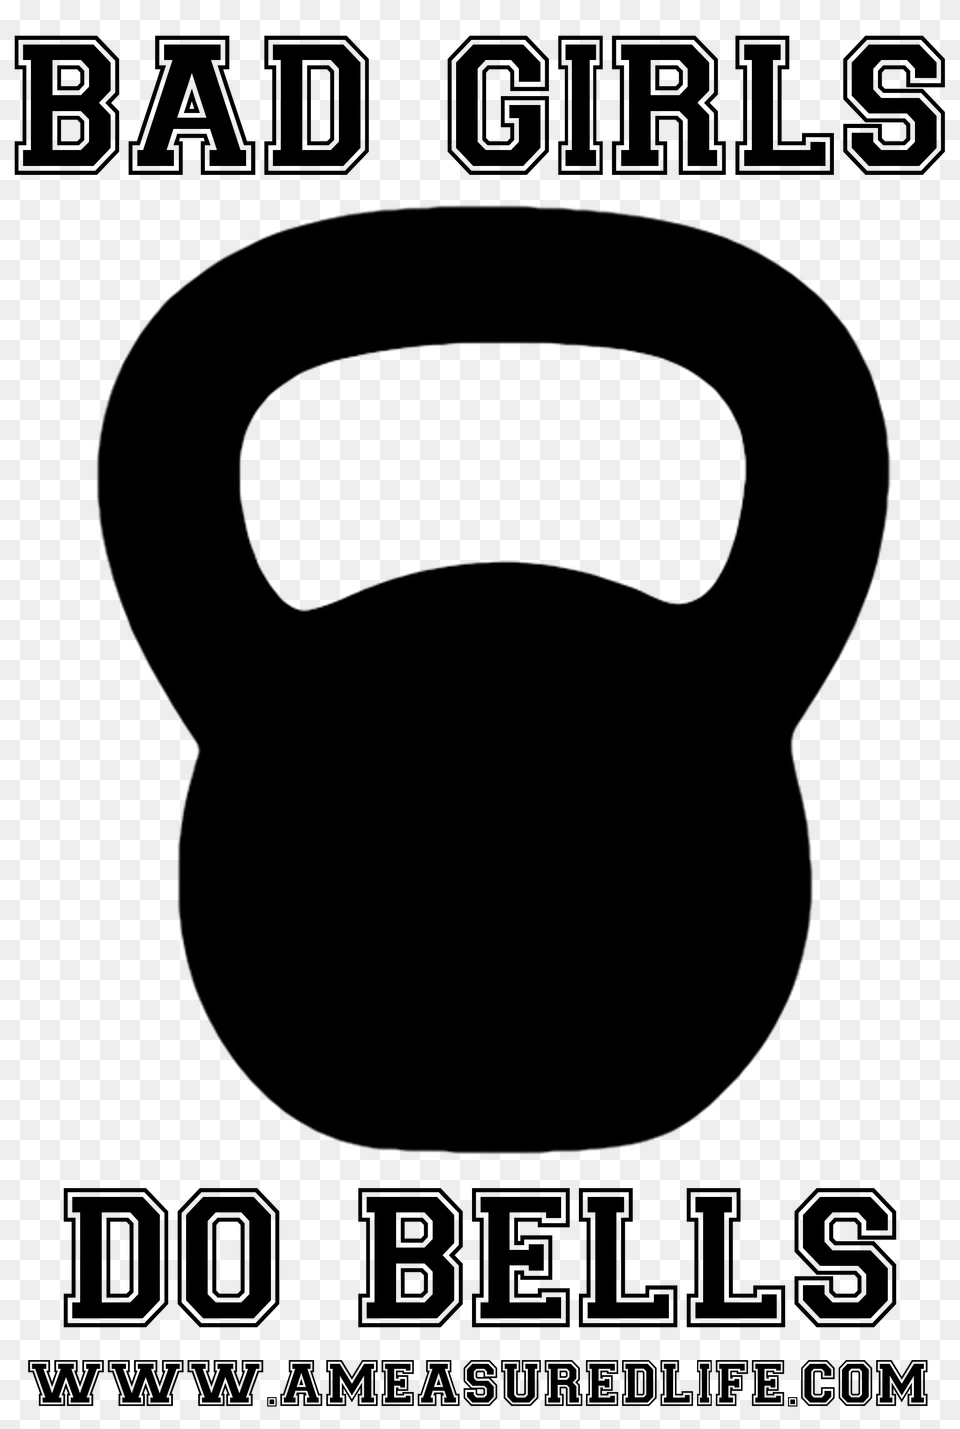 Designing Your Own Kettlebell Workout Part Ii A Measured Life, Cushion, Home Decor Free Transparent Png